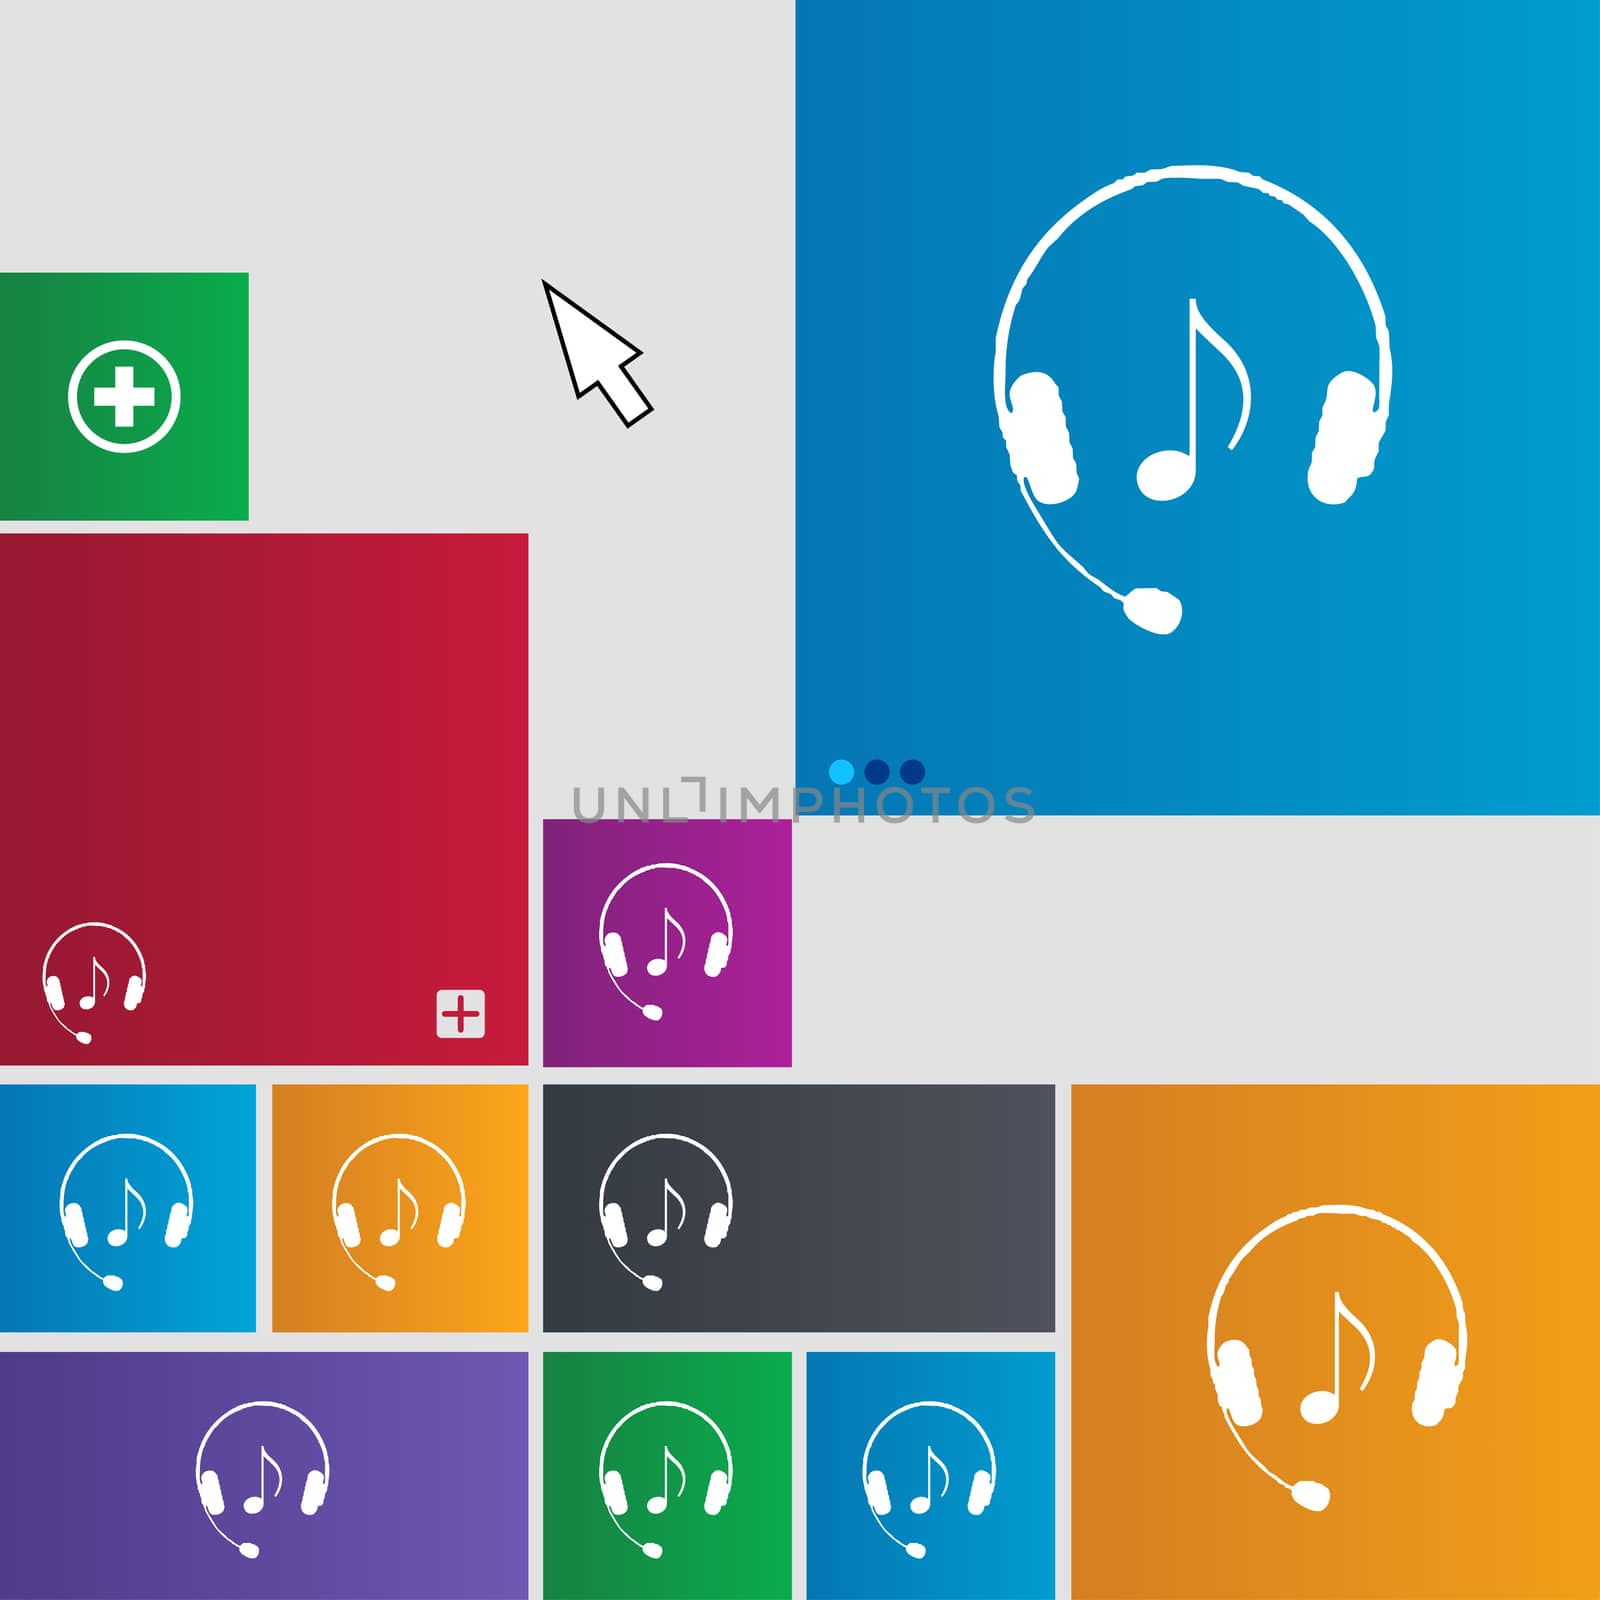 headsets icon sign. buttons. Modern interface website buttons with cursor pointer. illustration